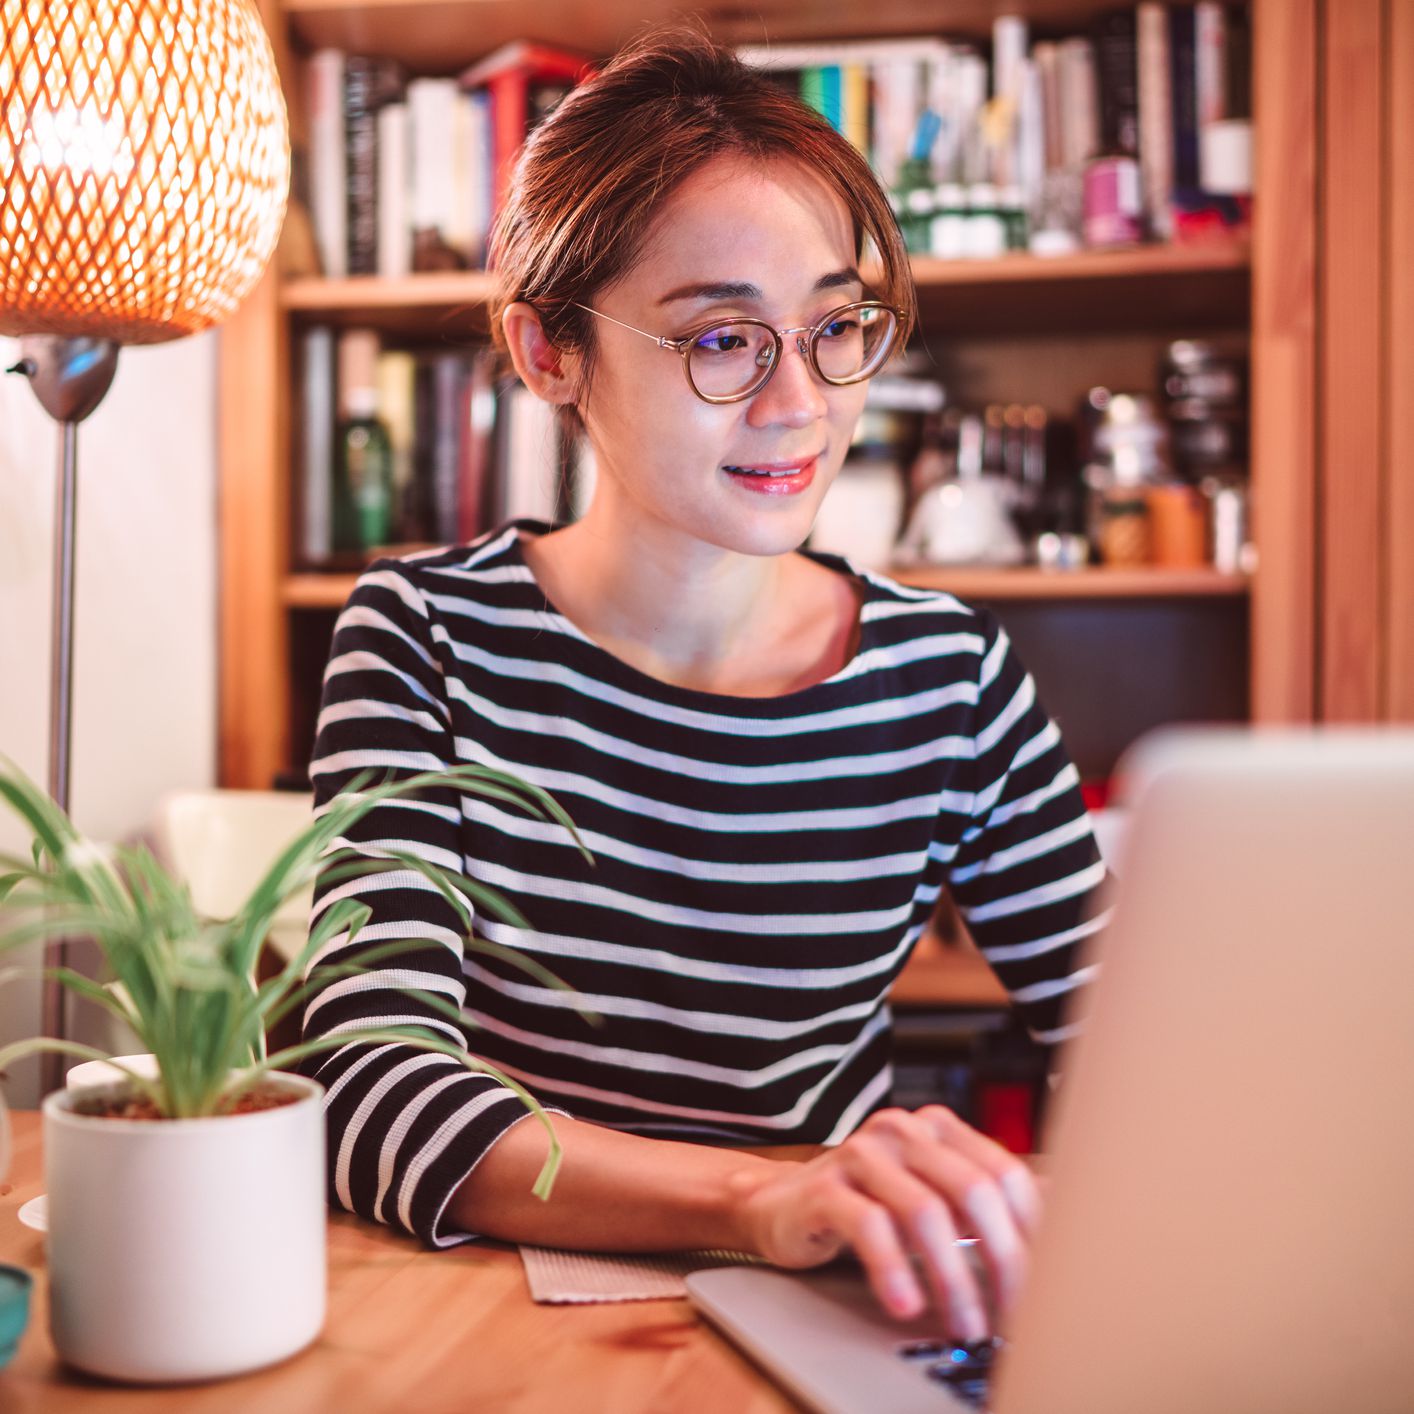 Read more about the article Amazon Data Entry Jobs from Home | Are Data Entry Jobs From Home For Real?<span class="rmp-archive-results-widget "><i class=" rmp-icon rmp-icon--ratings rmp-icon--star rmp-icon--full-highlight"></i><i class=" rmp-icon rmp-icon--ratings rmp-icon--star rmp-icon--full-highlight"></i><i class=" rmp-icon rmp-icon--ratings rmp-icon--star rmp-icon--full-highlight"></i><i class=" rmp-icon rmp-icon--ratings rmp-icon--star rmp-icon--full-highlight"></i><i class=" rmp-icon rmp-icon--ratings rmp-icon--star rmp-icon--full-highlight"></i> <span>5 (31)</span></span>